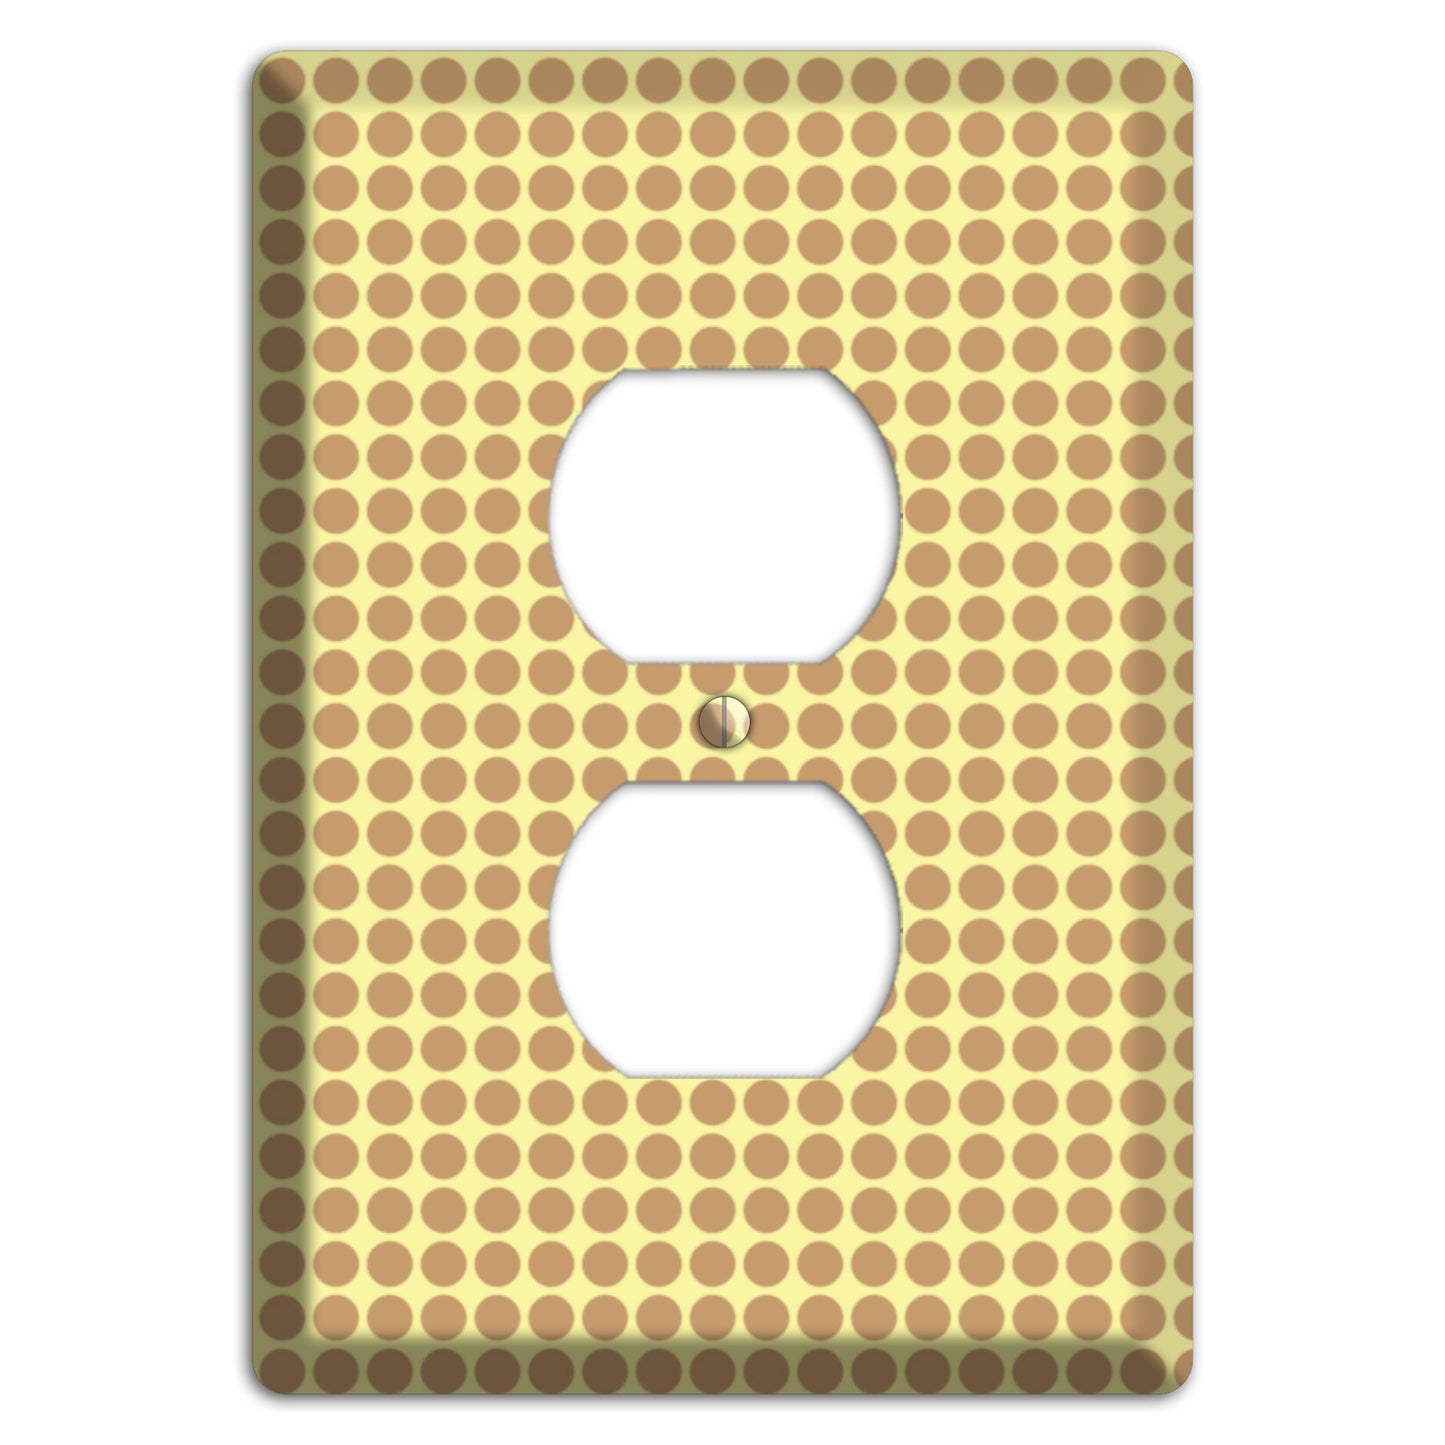 Yellow with Light Brown Tiled Small Dots Duplex Outlet Wallplate